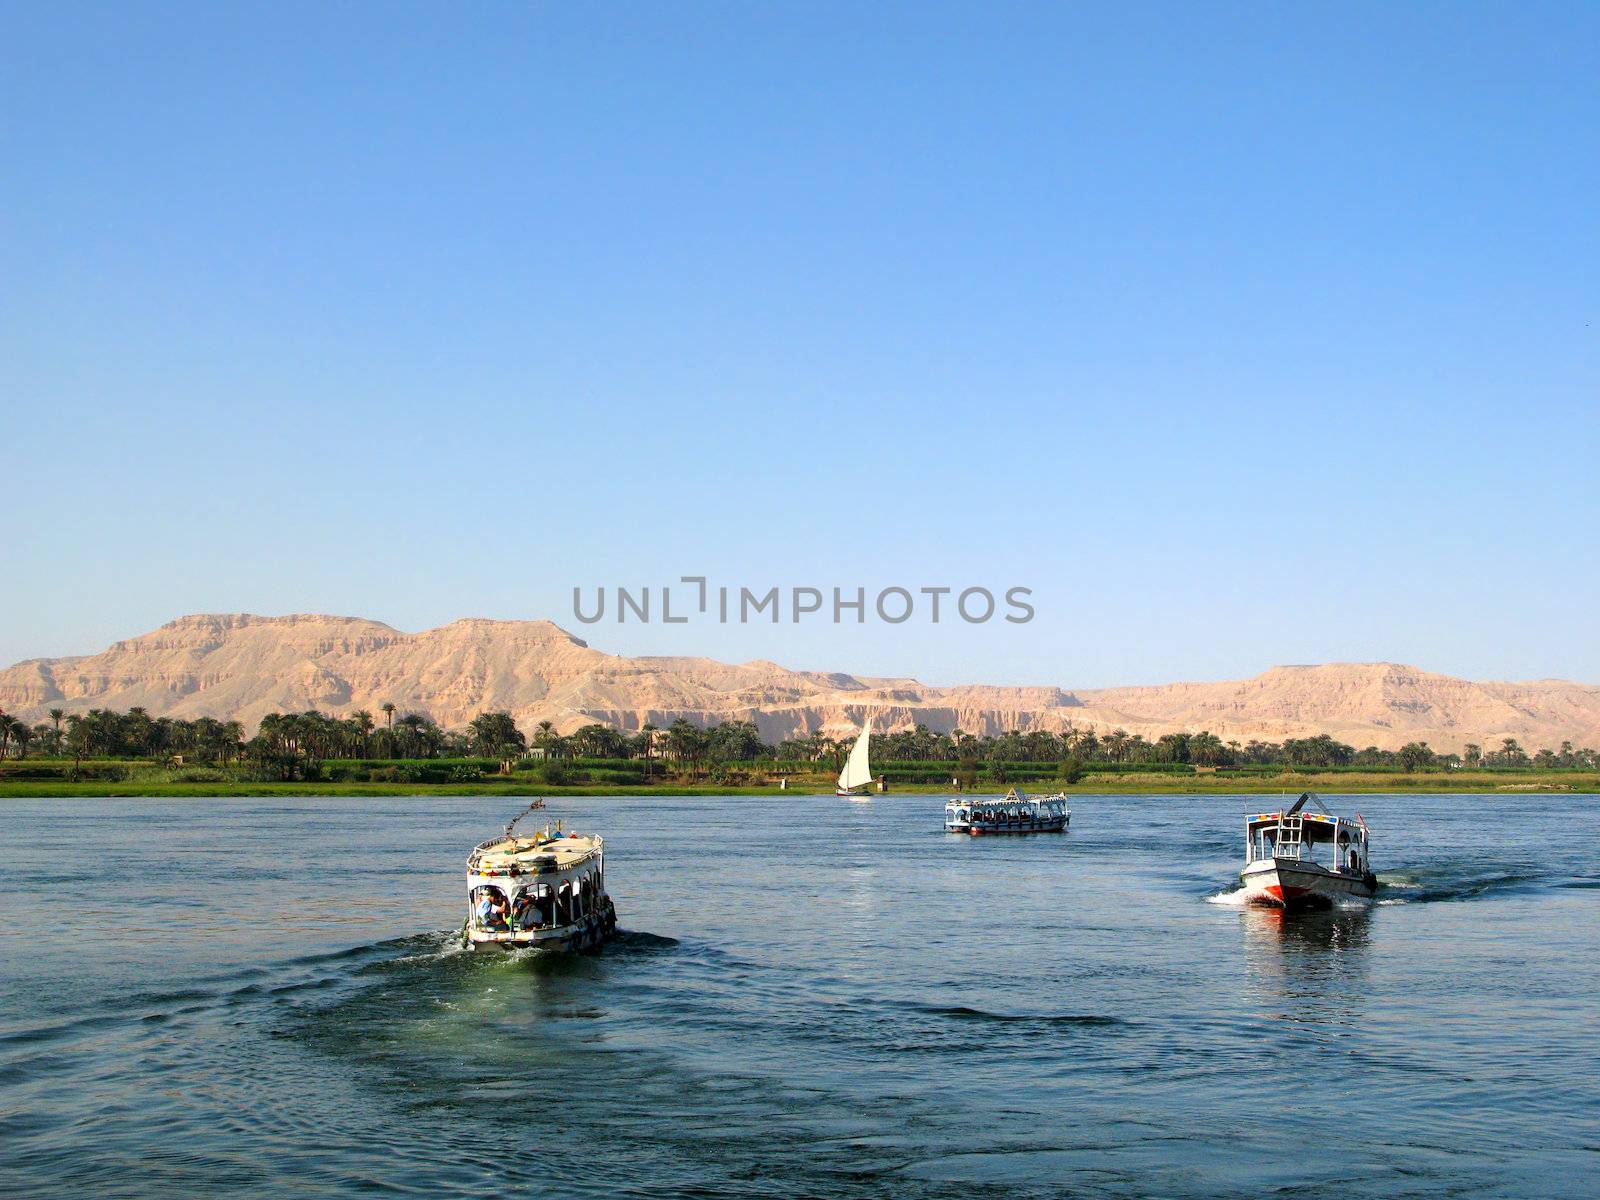 Nile river with boats in Egypt by palinchak